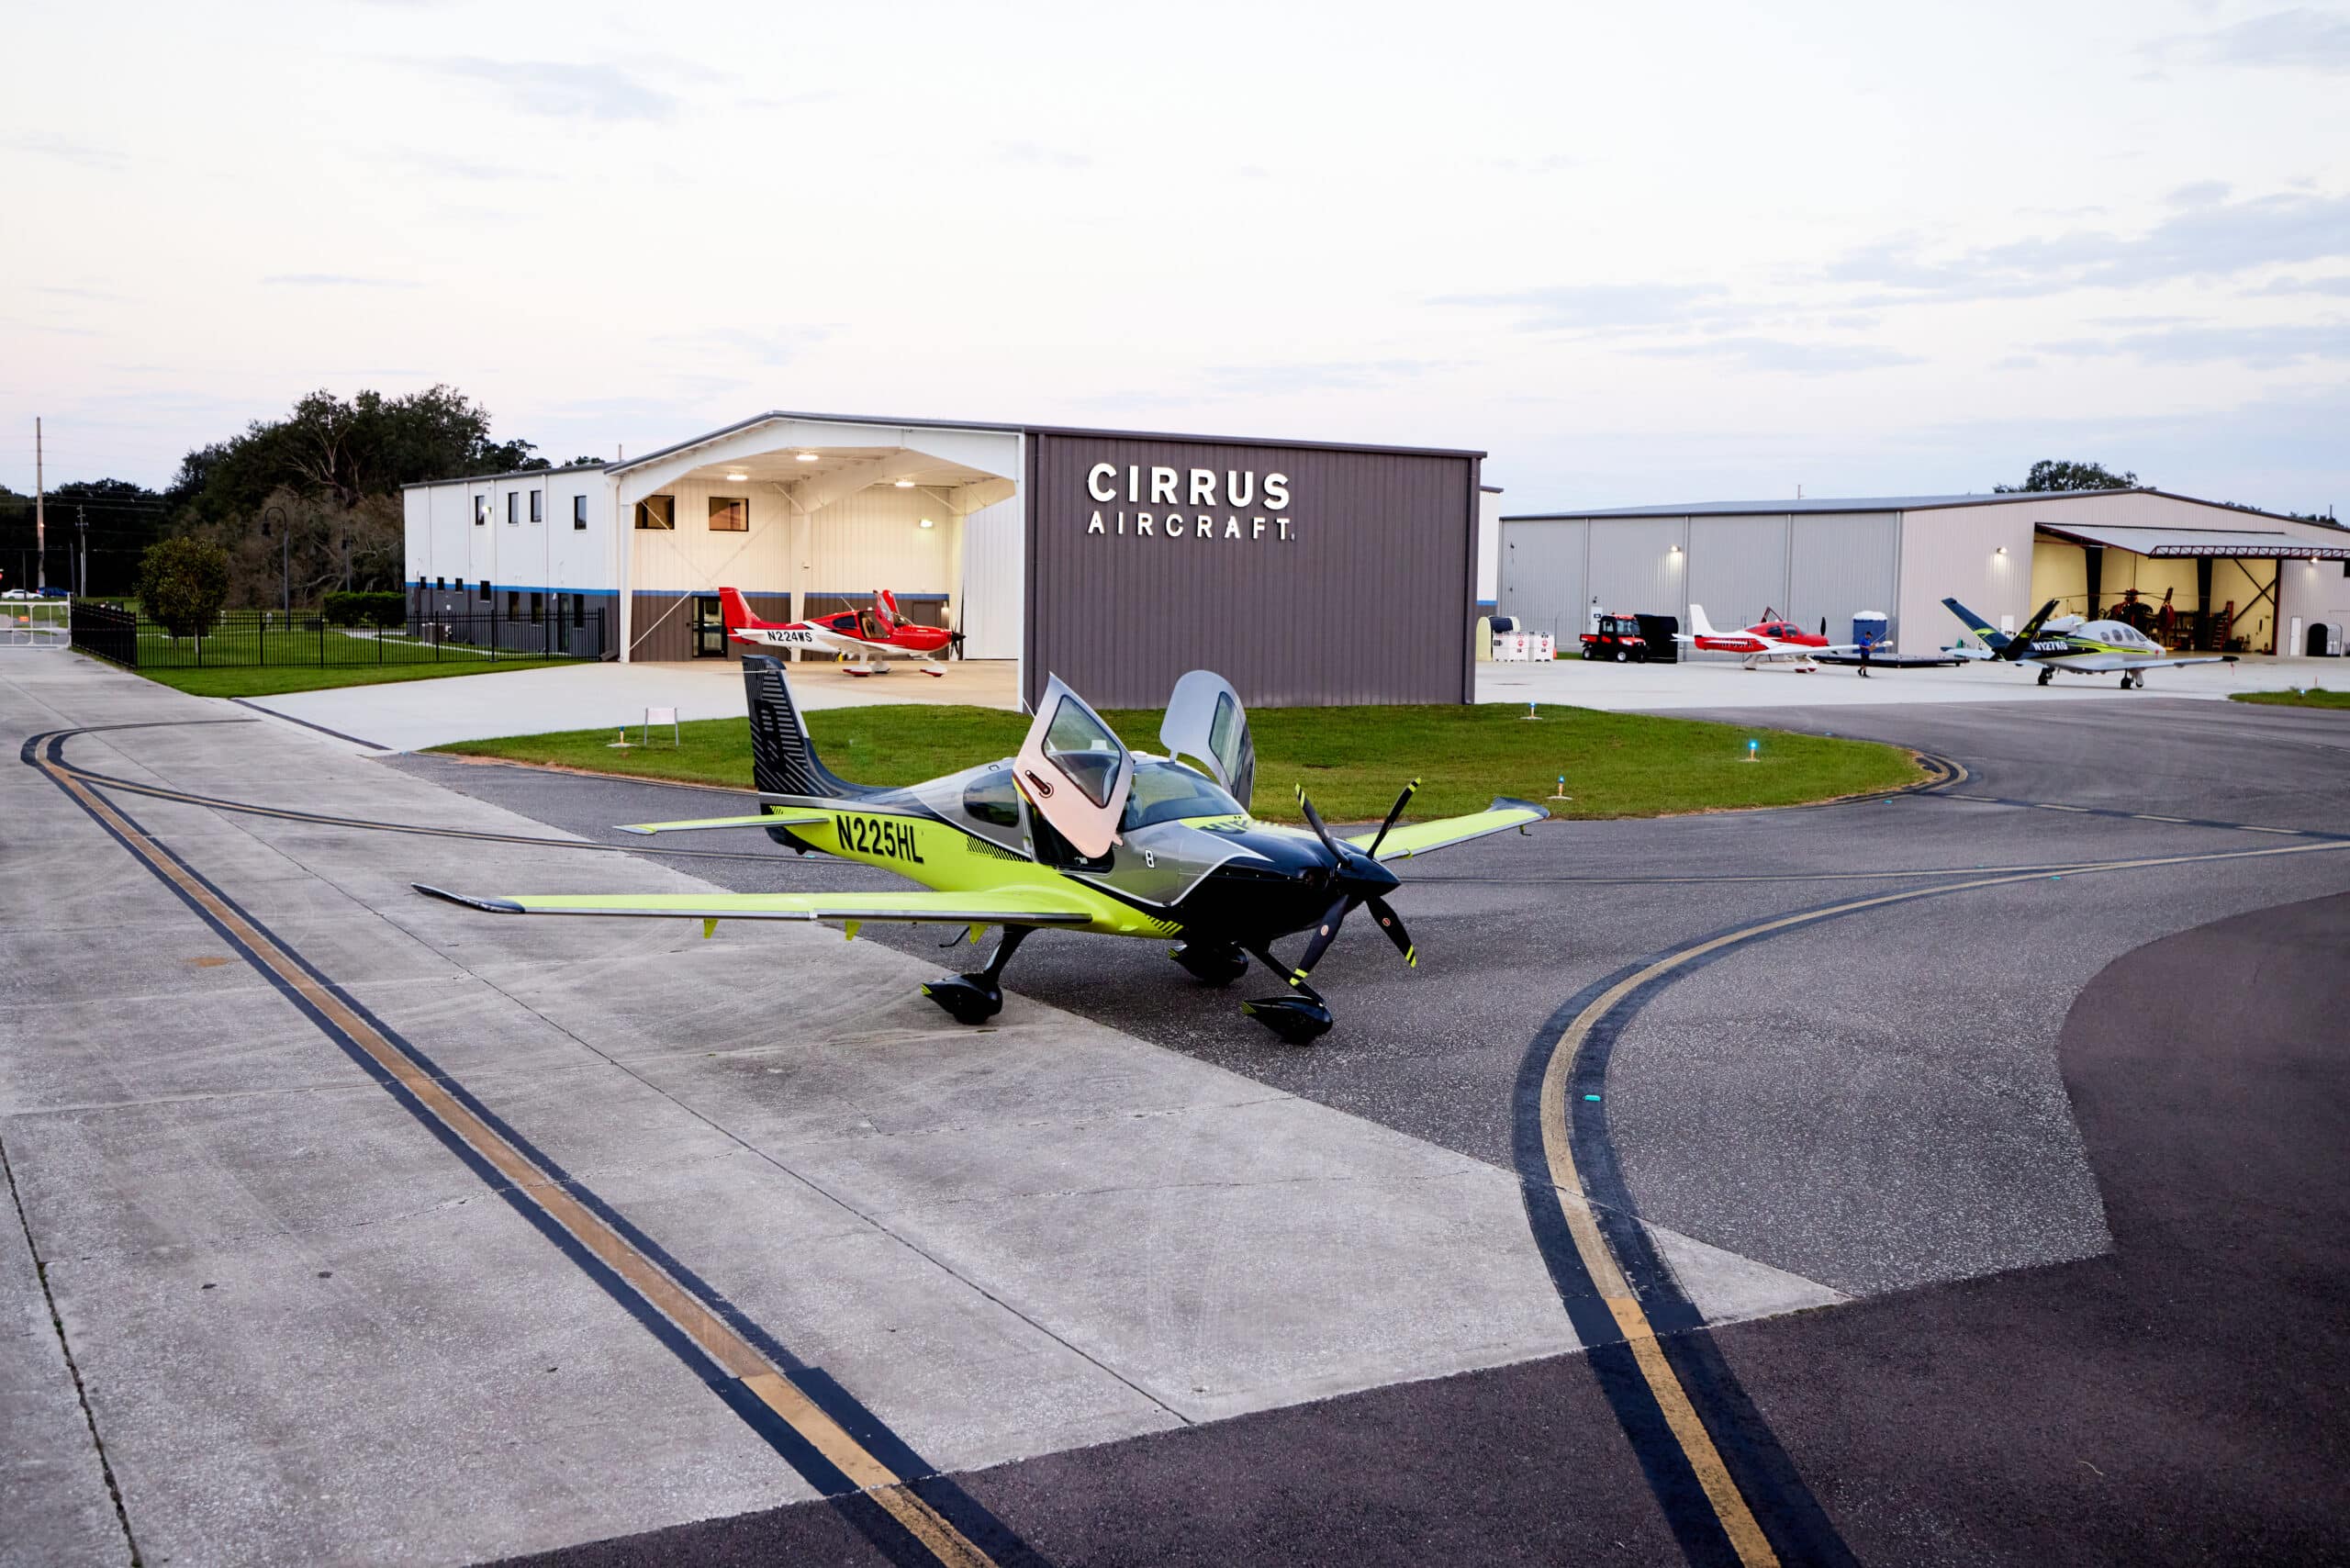 Cirrus Aircraft Announces Cirrus Orlando with Two New Locations in Central Florida